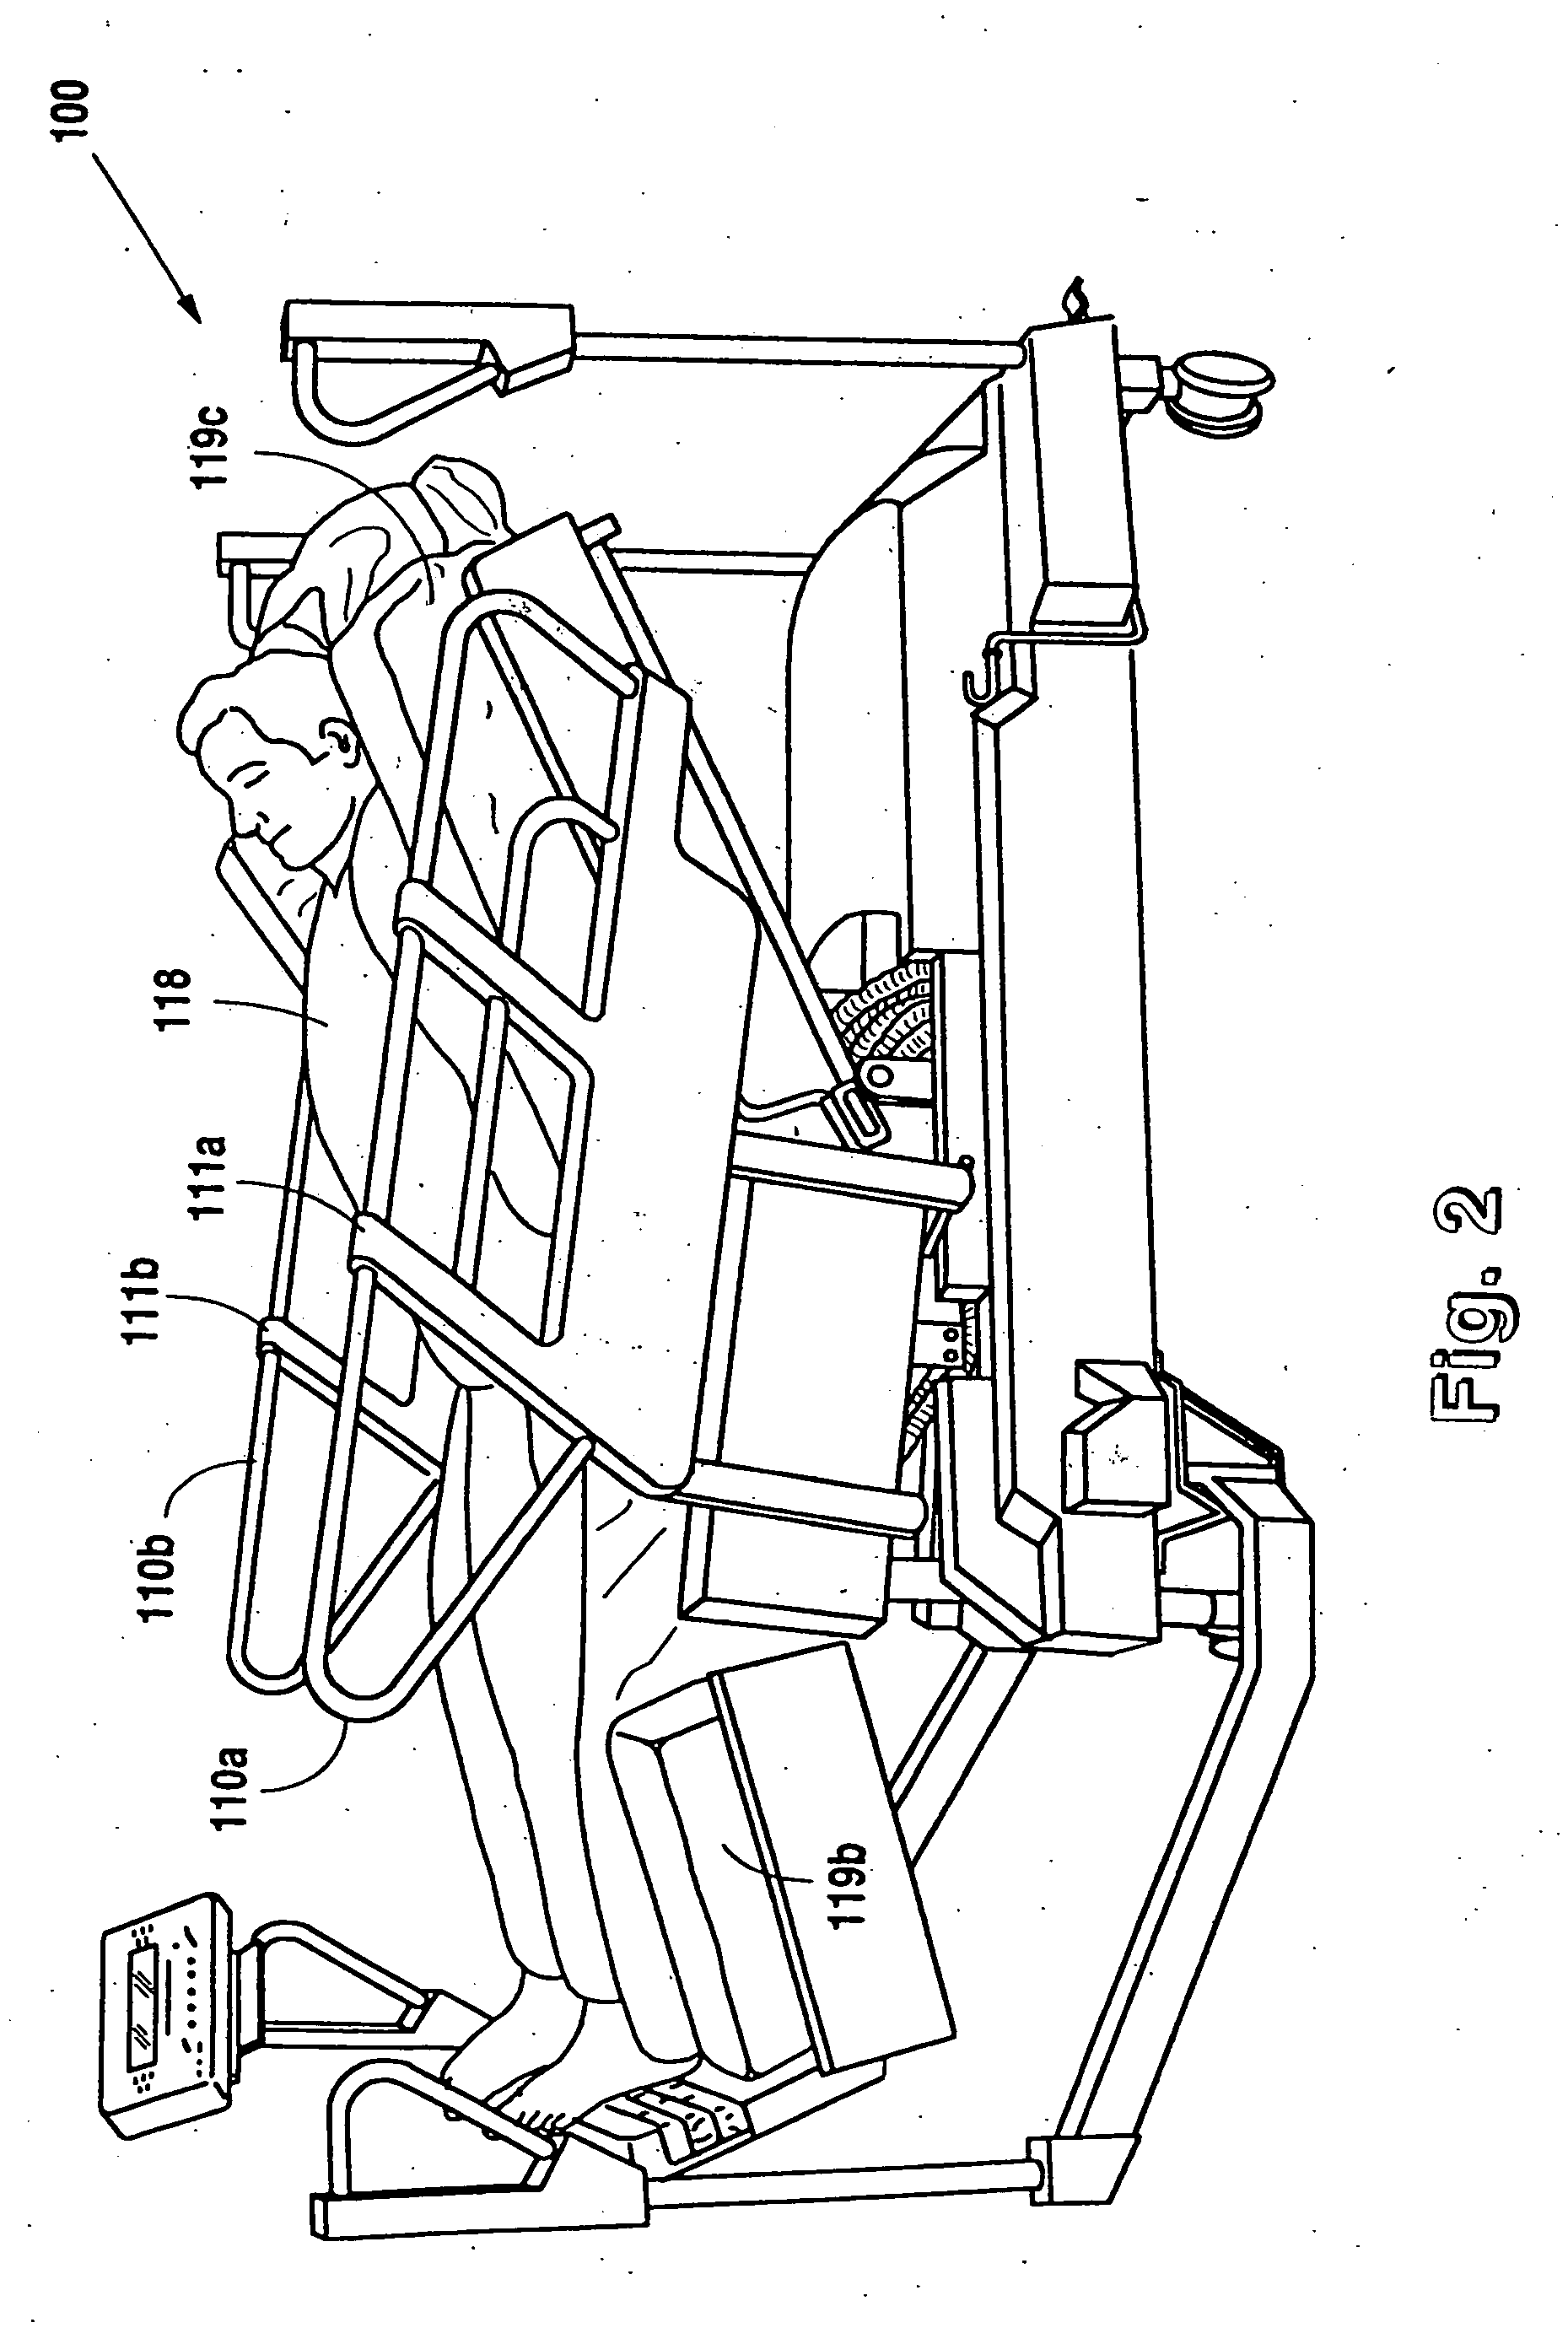 Bariatric treatment system and related methods